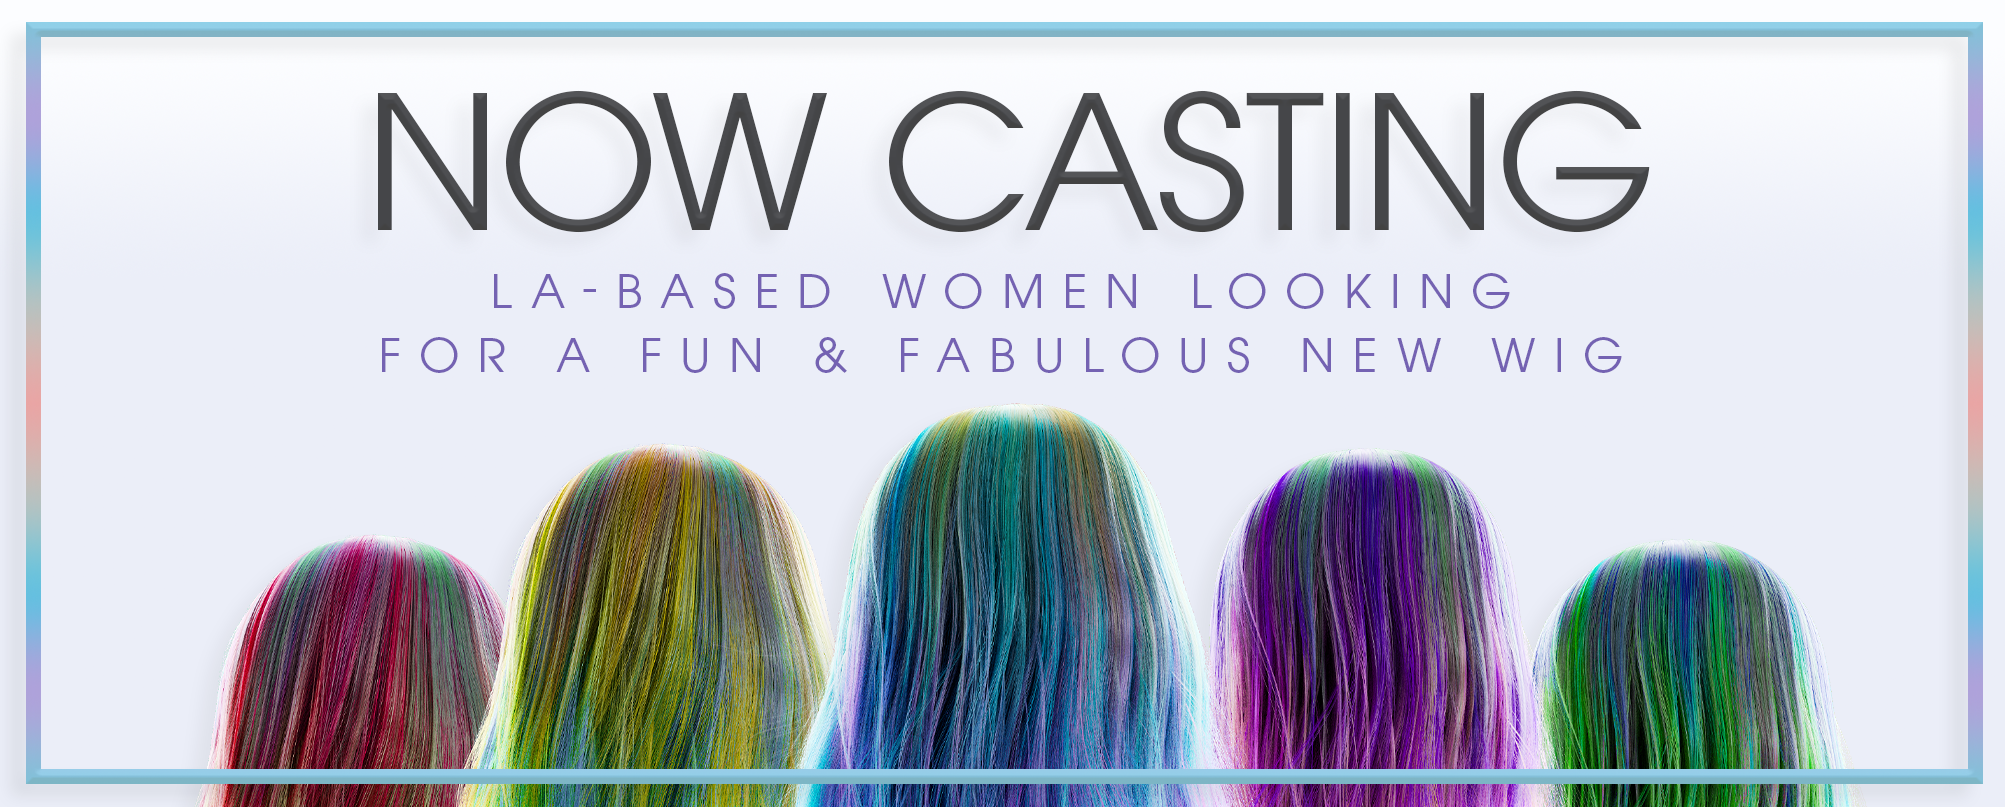 Now Casting LA-Based Women Looking For a Fun & Fabulous New Wig